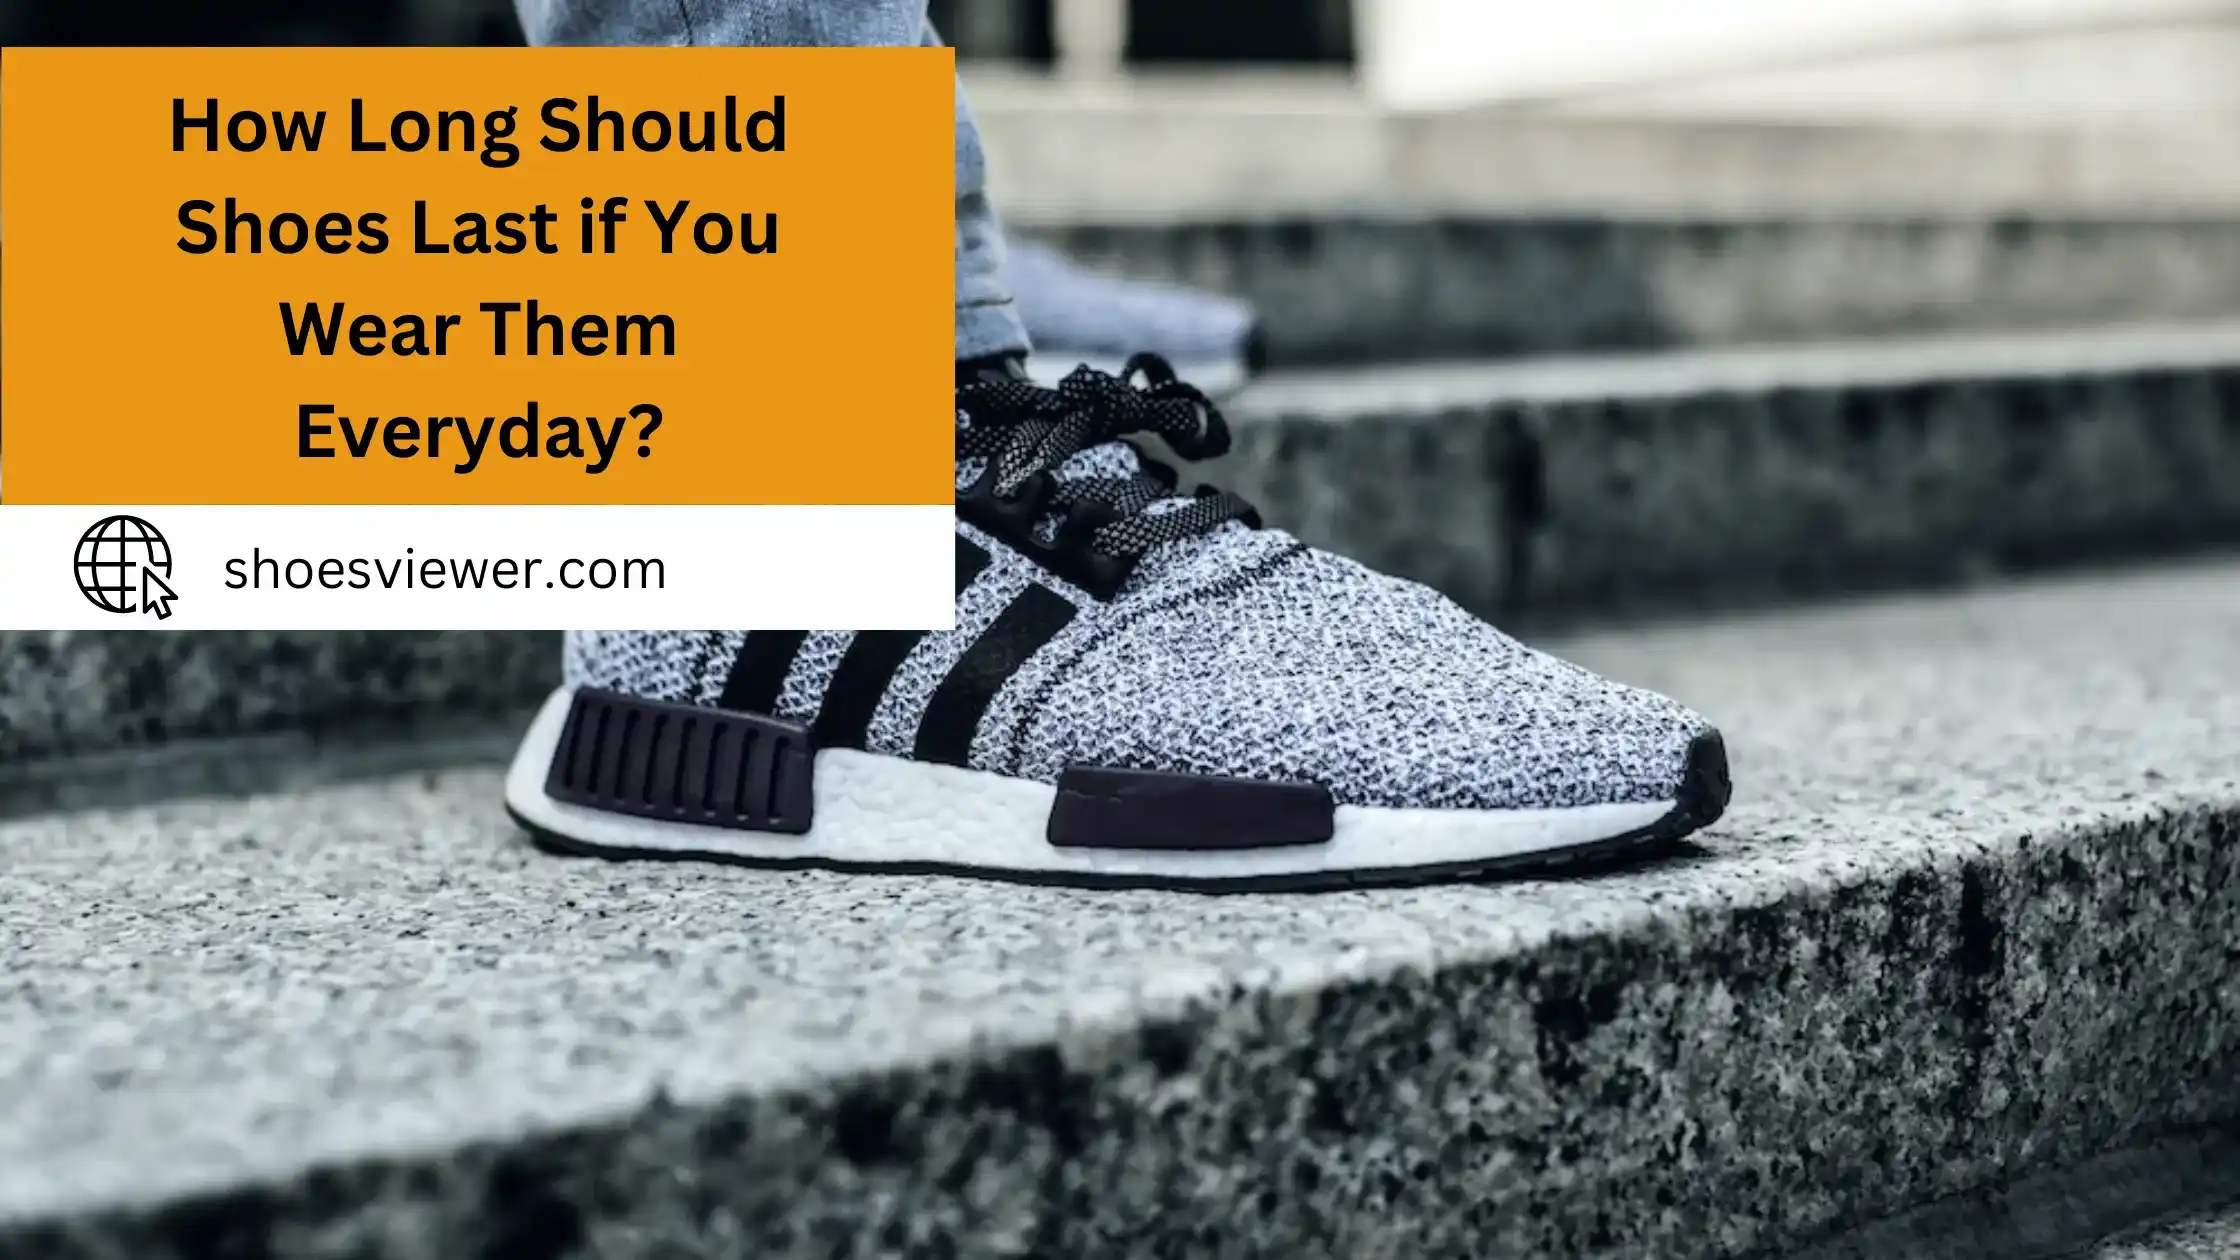 How Long Should Shoes Last if You Wear Them Everyday? #1 Guide